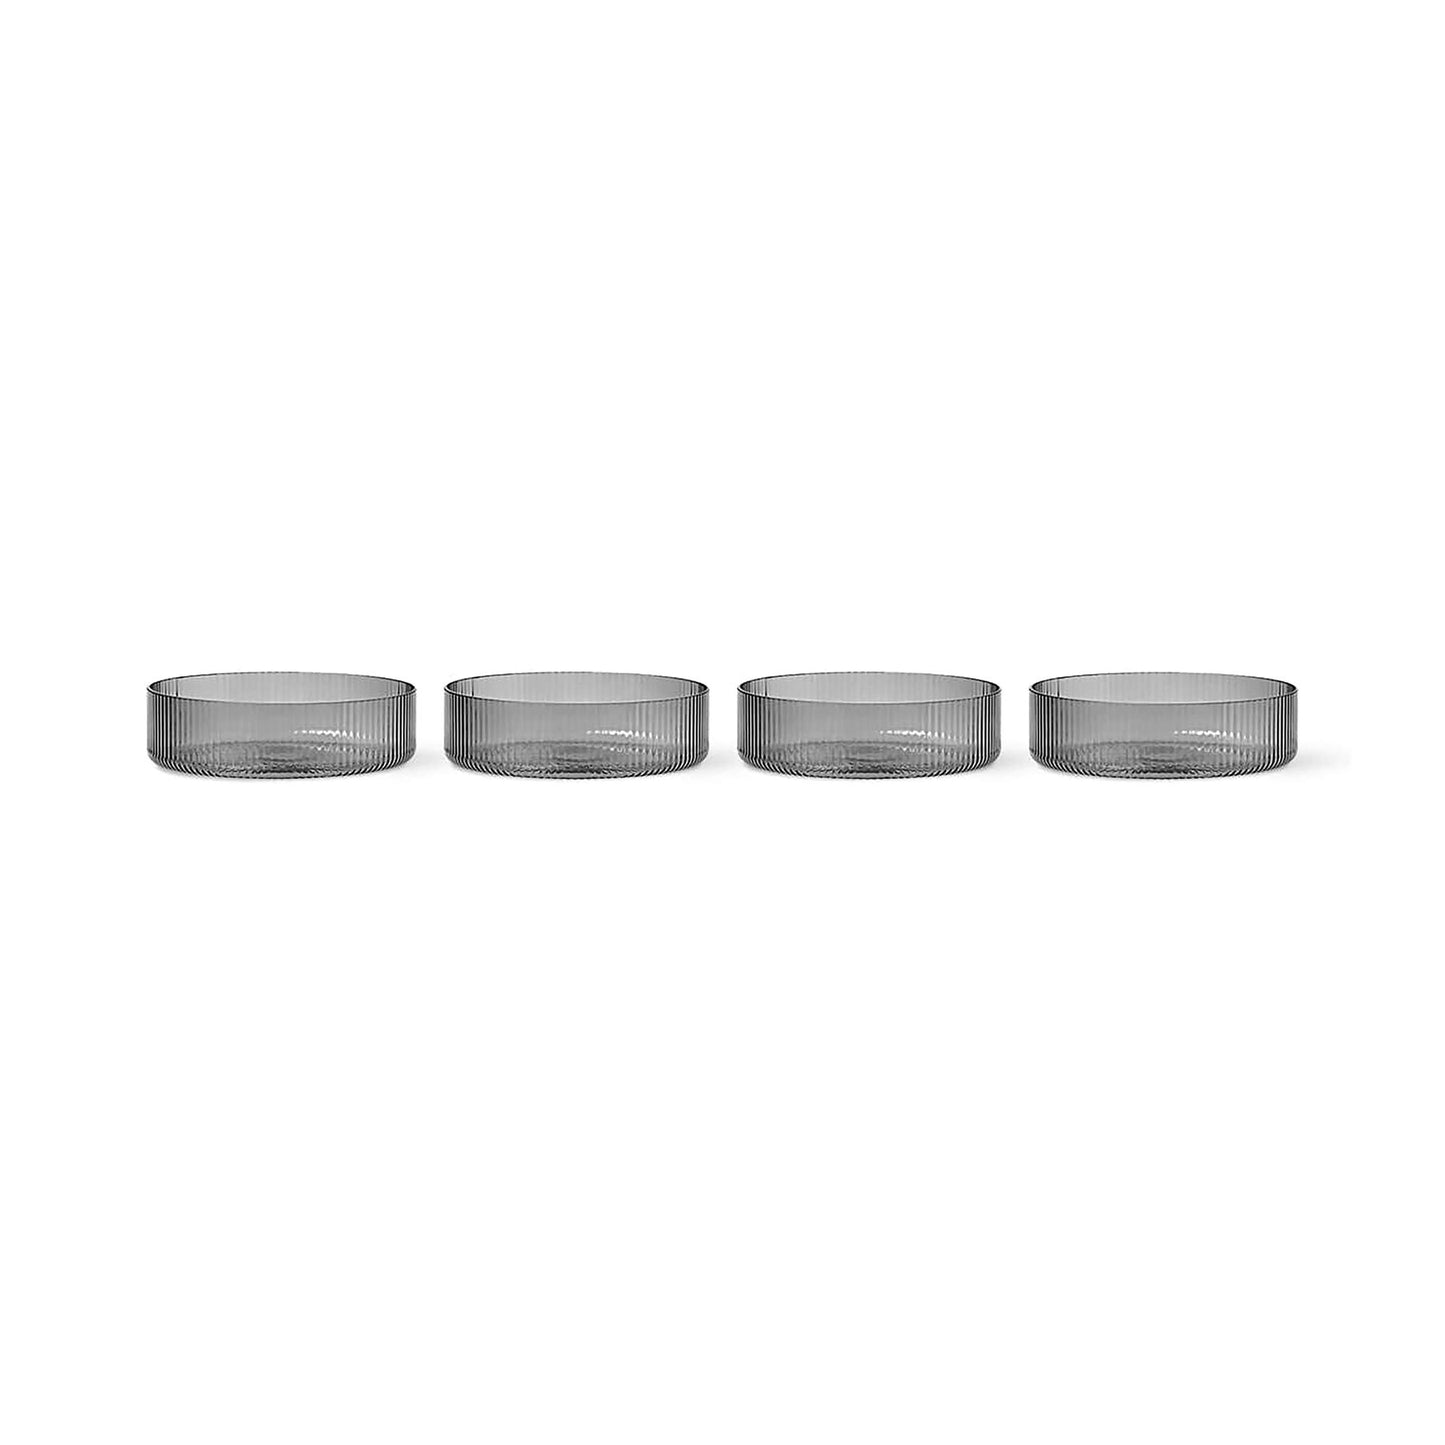 Ripple Serving Bowl Set of 4 by Ferm Living #Smoked